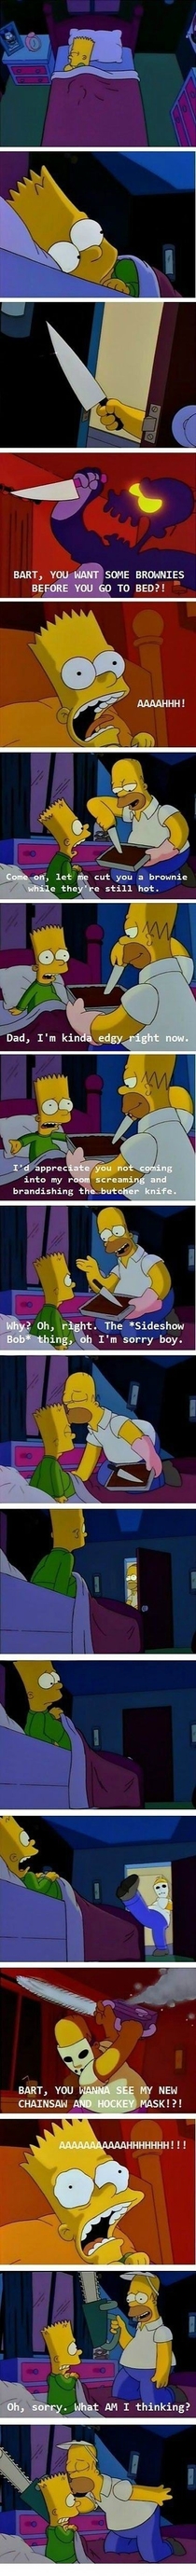 I miss the old Simpsons